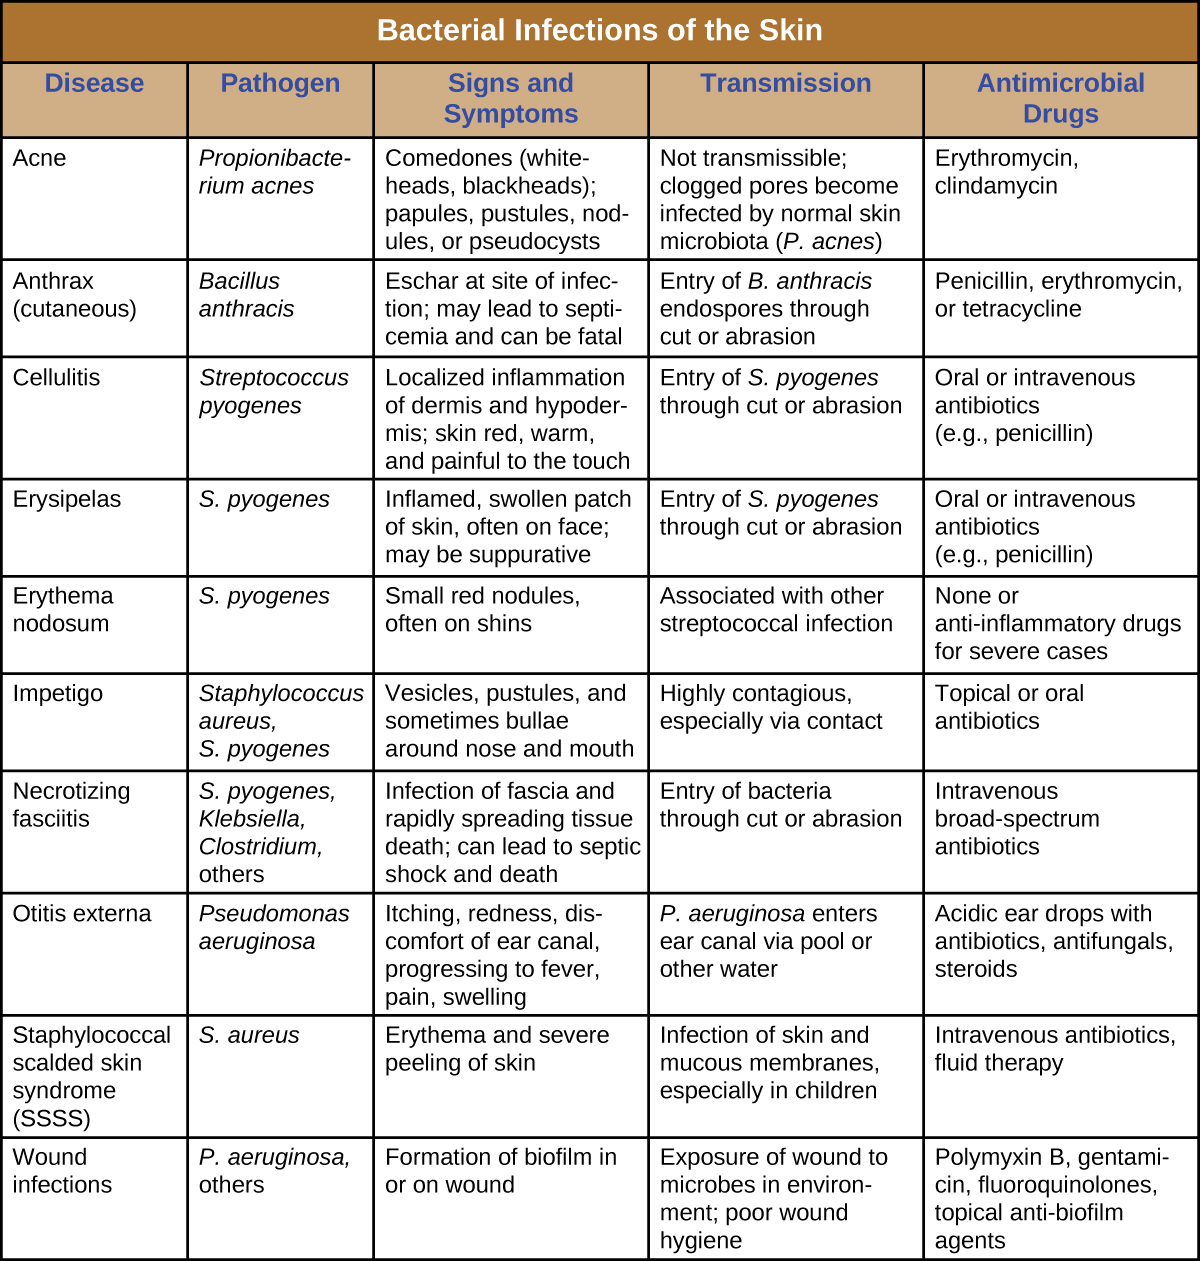 Table titled: Bacterial Infections of the Skin. Columns: Disease, Pathogen, Signs and Symptoms, Transmission, and Antimicrobial Drugs. Acne, Propionibacterium acnes, Comedones (whiteheads, blackheads); papules, pustules, nodules, or pseudocysts, Not transmissible; clogged pores become infected by normal skin microbiota (P. acnes), Erythromycin, clindamycin. Anthrax (cutaneous), Bacillus anthracis, Eschar at site of infection; may lead to septicemia and can be fatal, Entry of B. anthracis endospores through cut or abrasion, Penicillin, erythromycin, or tetracycline. Cellulitis, Streptococcus pyogenes, Localized inflammation of dermis and hypodermis; skin red, warm, and painful to the touch, Entry of S. pyogenes through cut or abrasion, Oral or intravenous antibiotics (e.g., penicillin). Erysipelas, S. pyogenes, Inflamed, swollen patch of skin, often on face; may be suppurative, Entry of S. pyogenes through cut or abrasion, Oral or intravenous antibiotics (e.g., penicillin). Erythema nodosum, S. pyogenes, Small red nodules, often on shins, Associated with other streptococcal infection, None or anti-inflammatory drugs for severe cases. Impetigo, Staphylococcus aureus, S. pyogenes, Vesicles, pustules, and sometimes bullae around nose and mouth, Highly contagious, especially via contact Topical or oral antibiotics. Necrotizing fasciitis, S. pyogenes, Klebsiella, Clostridium, others, Infection of fascia and rapidly spreading tissue death; can lead to septic shock and death, Entry of bacteria through cut or abrasion, Intravenous broad-spectrum antibiotics. Otitis externa, Pseudomonas aeruginosa, Itching, redness, discomfort of ear canal, progressing to fever, pain, swelling, P. aeruginosa enters ear canal via pool or other water, Acidic ear drops with antibiotics, antifungals, steroids. Staphylococcal scalded skin syndrome (SSSS), S. aureus, Erythema and severe peeling of skin Infection of skin and mucous membranes, especially in children, Intravenous antibiotics, fluid therapy. Wound infections, P. aeruginosa, others, Formation of biofilm in or on wound. Exposure of wound to microbes in environment; poor wound hygiene, Polymyxin B, gentamicin, fluoroquinolones, topical anti-biofilm agents.